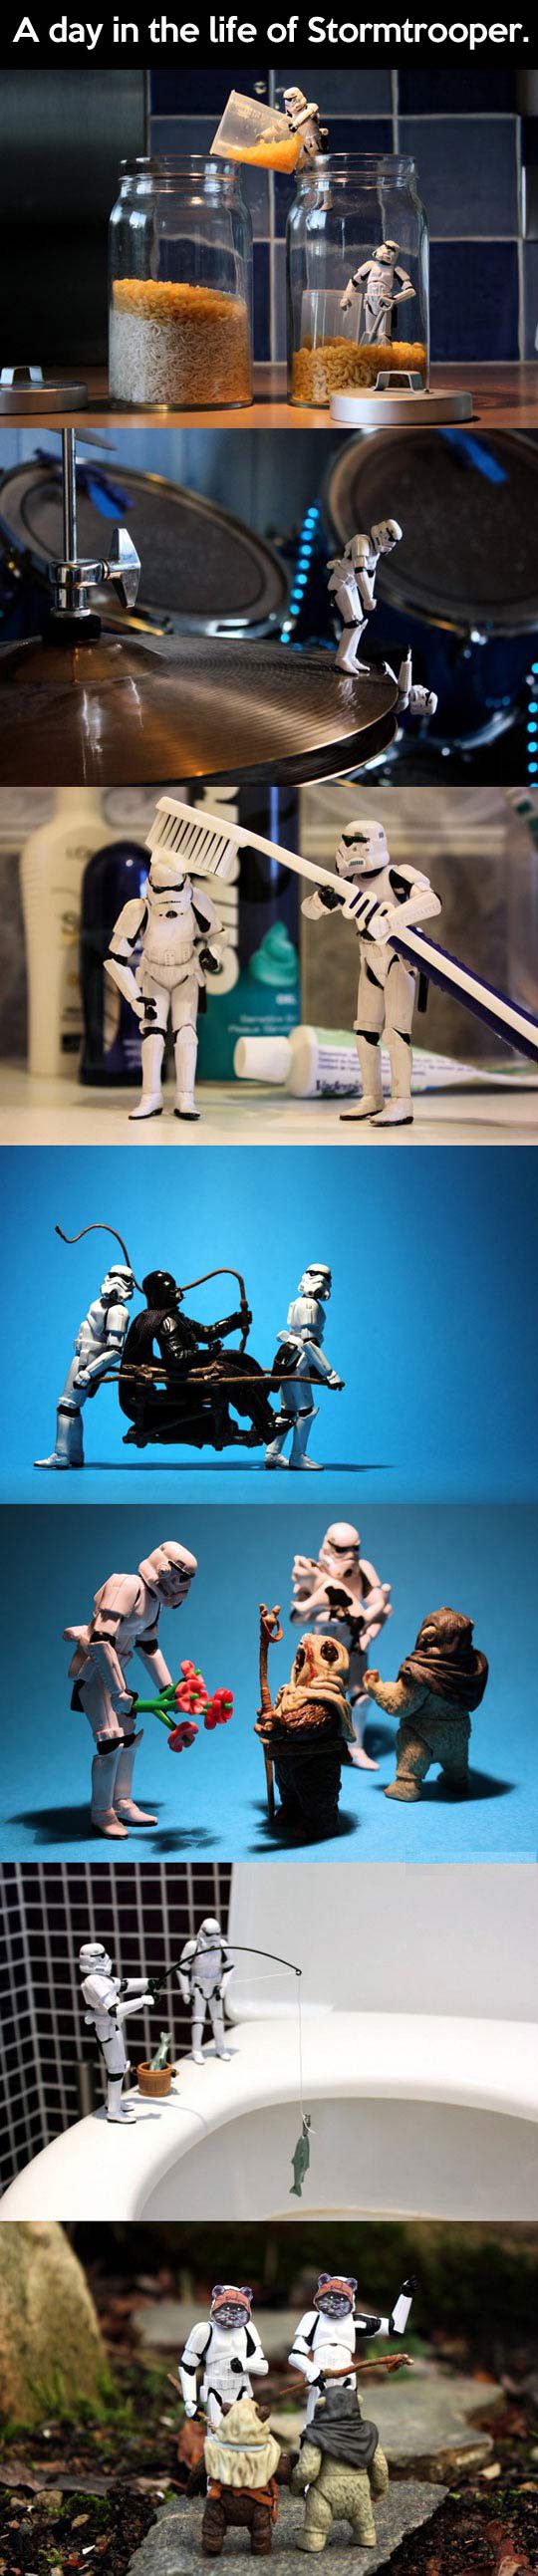 A DAY IN THE LIFE OF A STORMTROOPER.